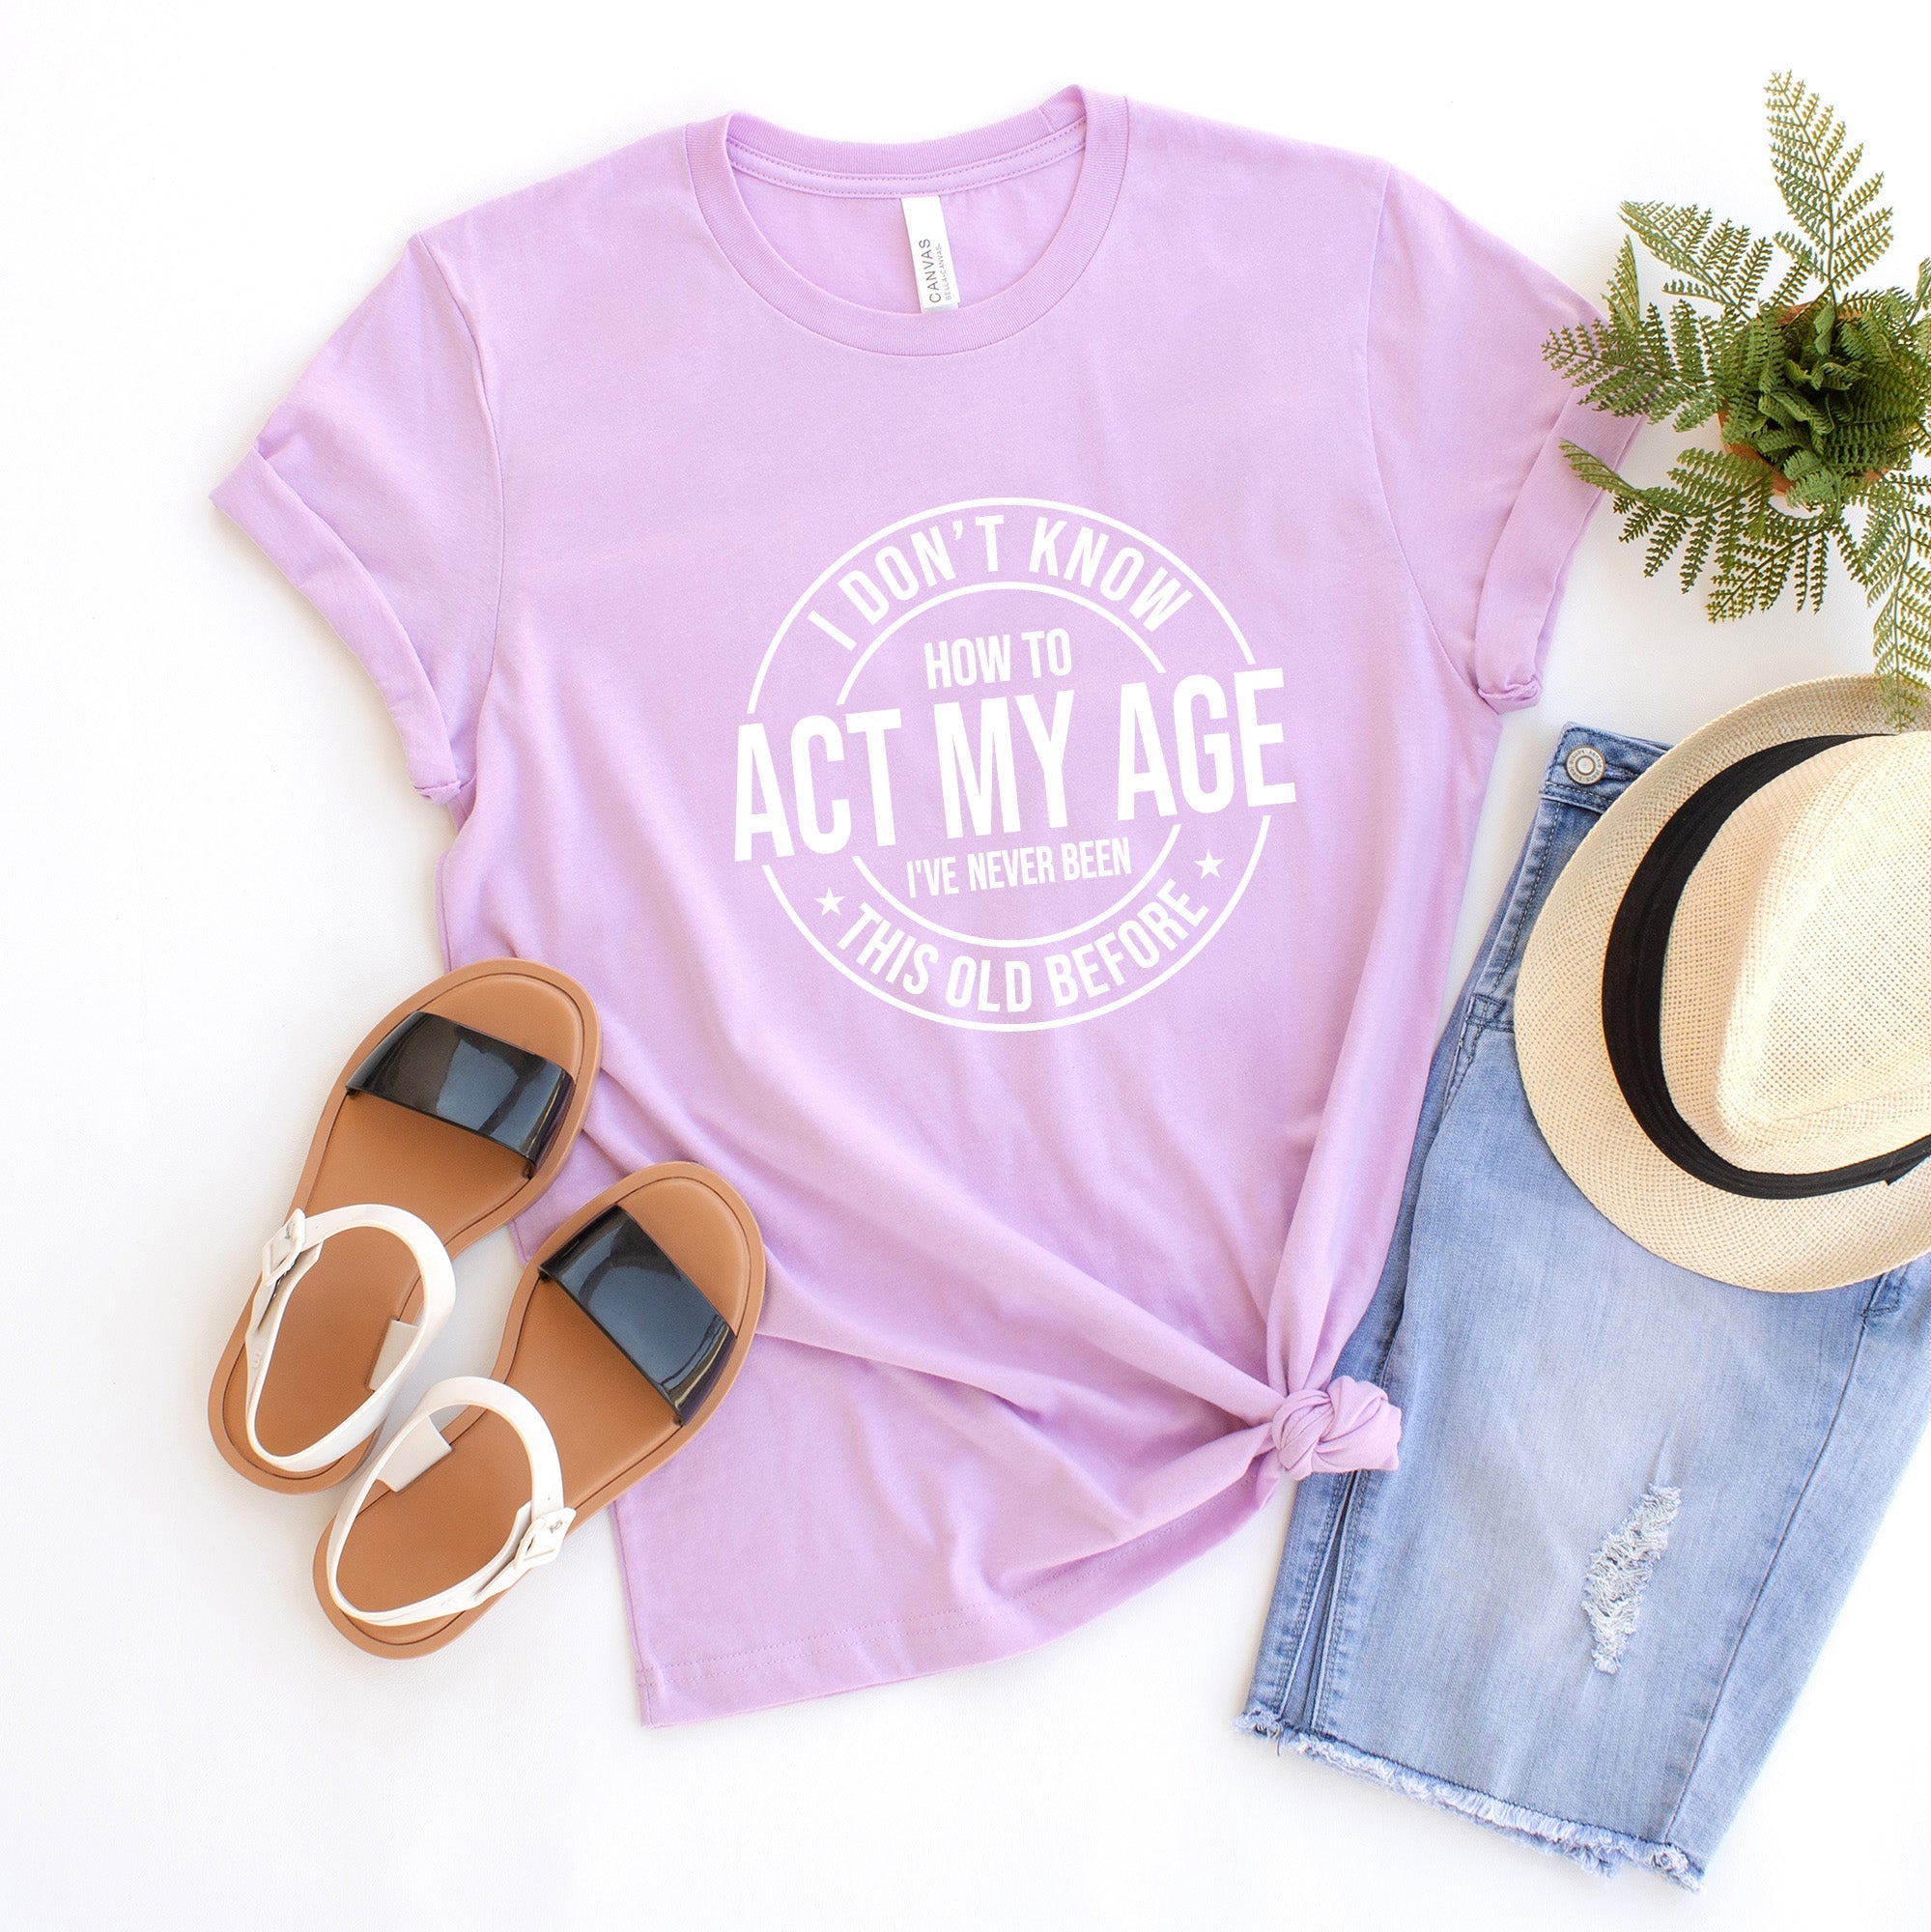 Act My Age | Short Sleeve Crew Neck Olive and Ivory Retail